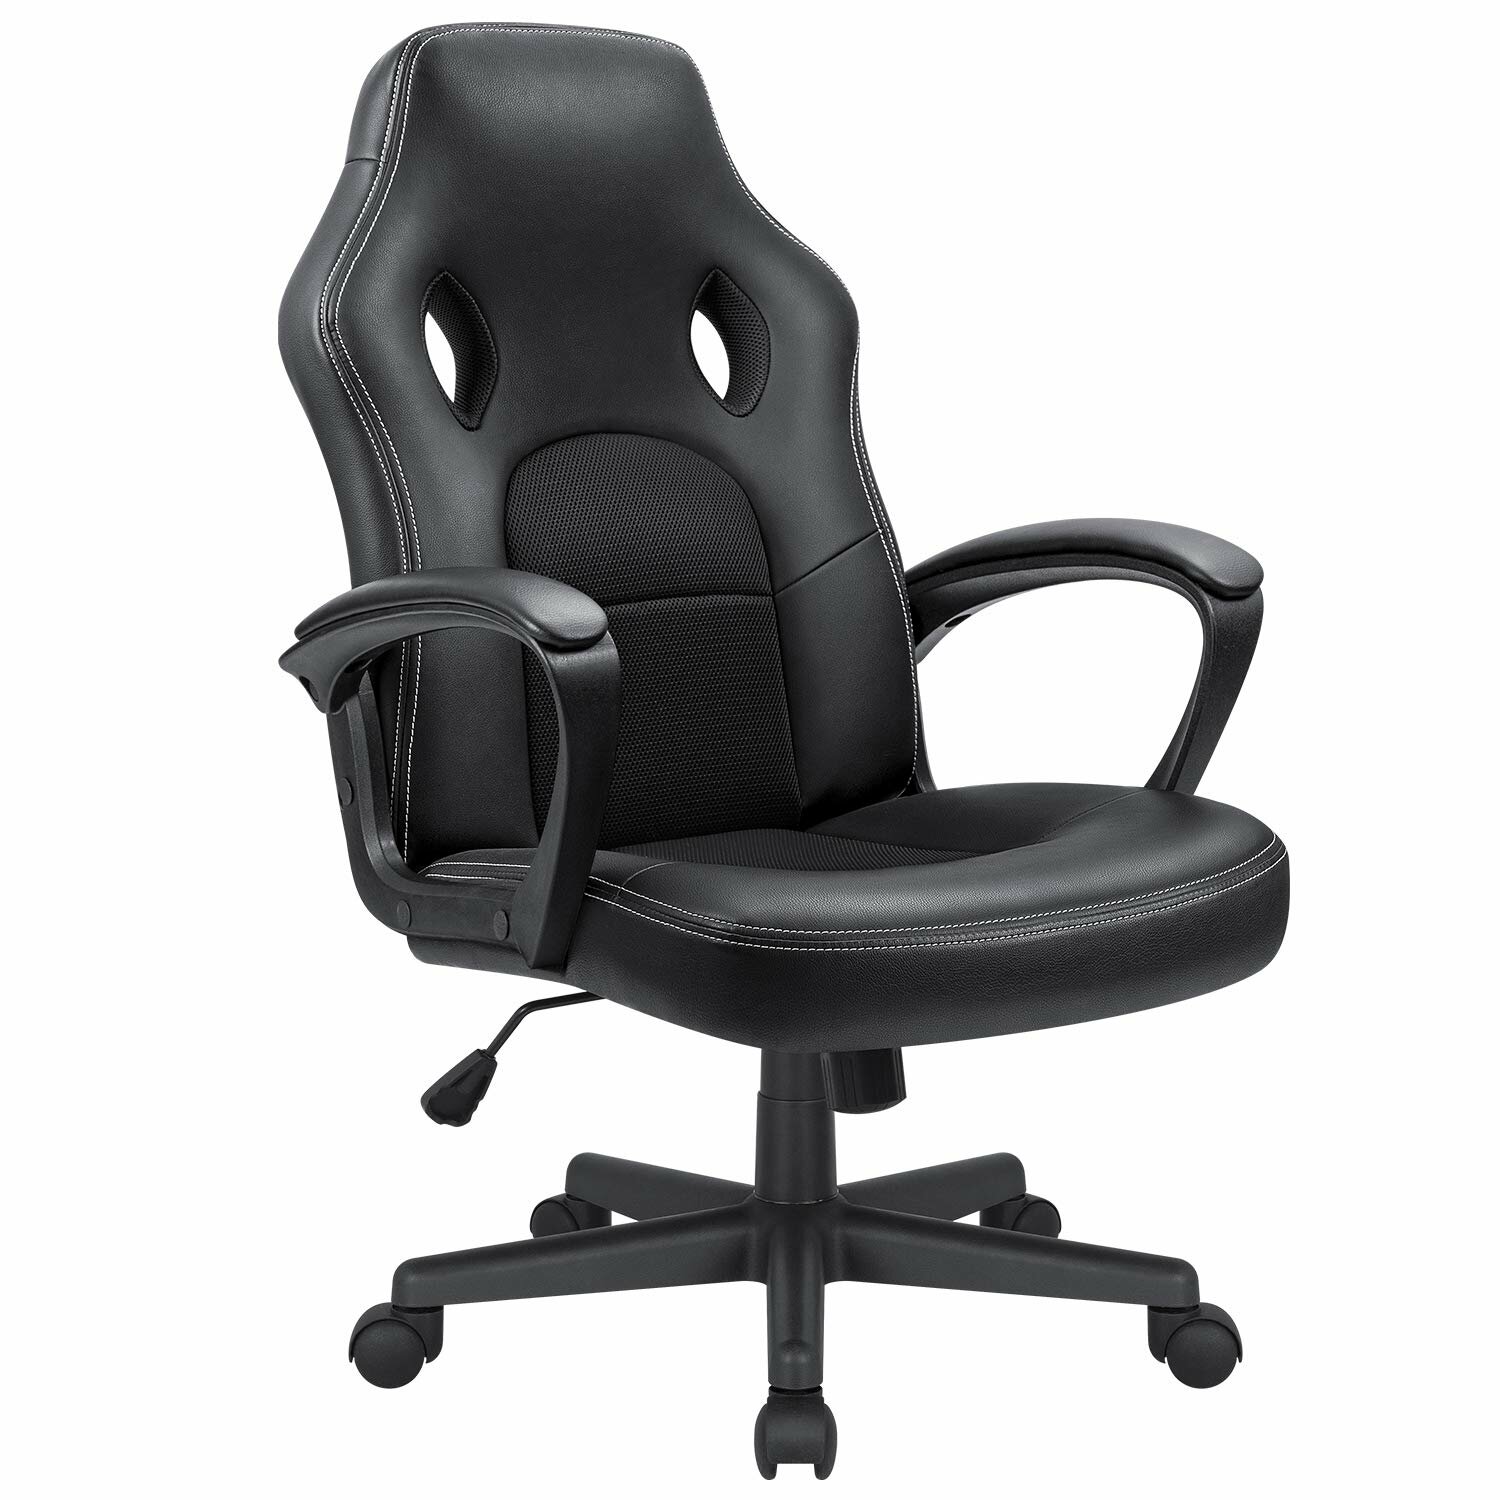 Details about   High quality black leather office chair 